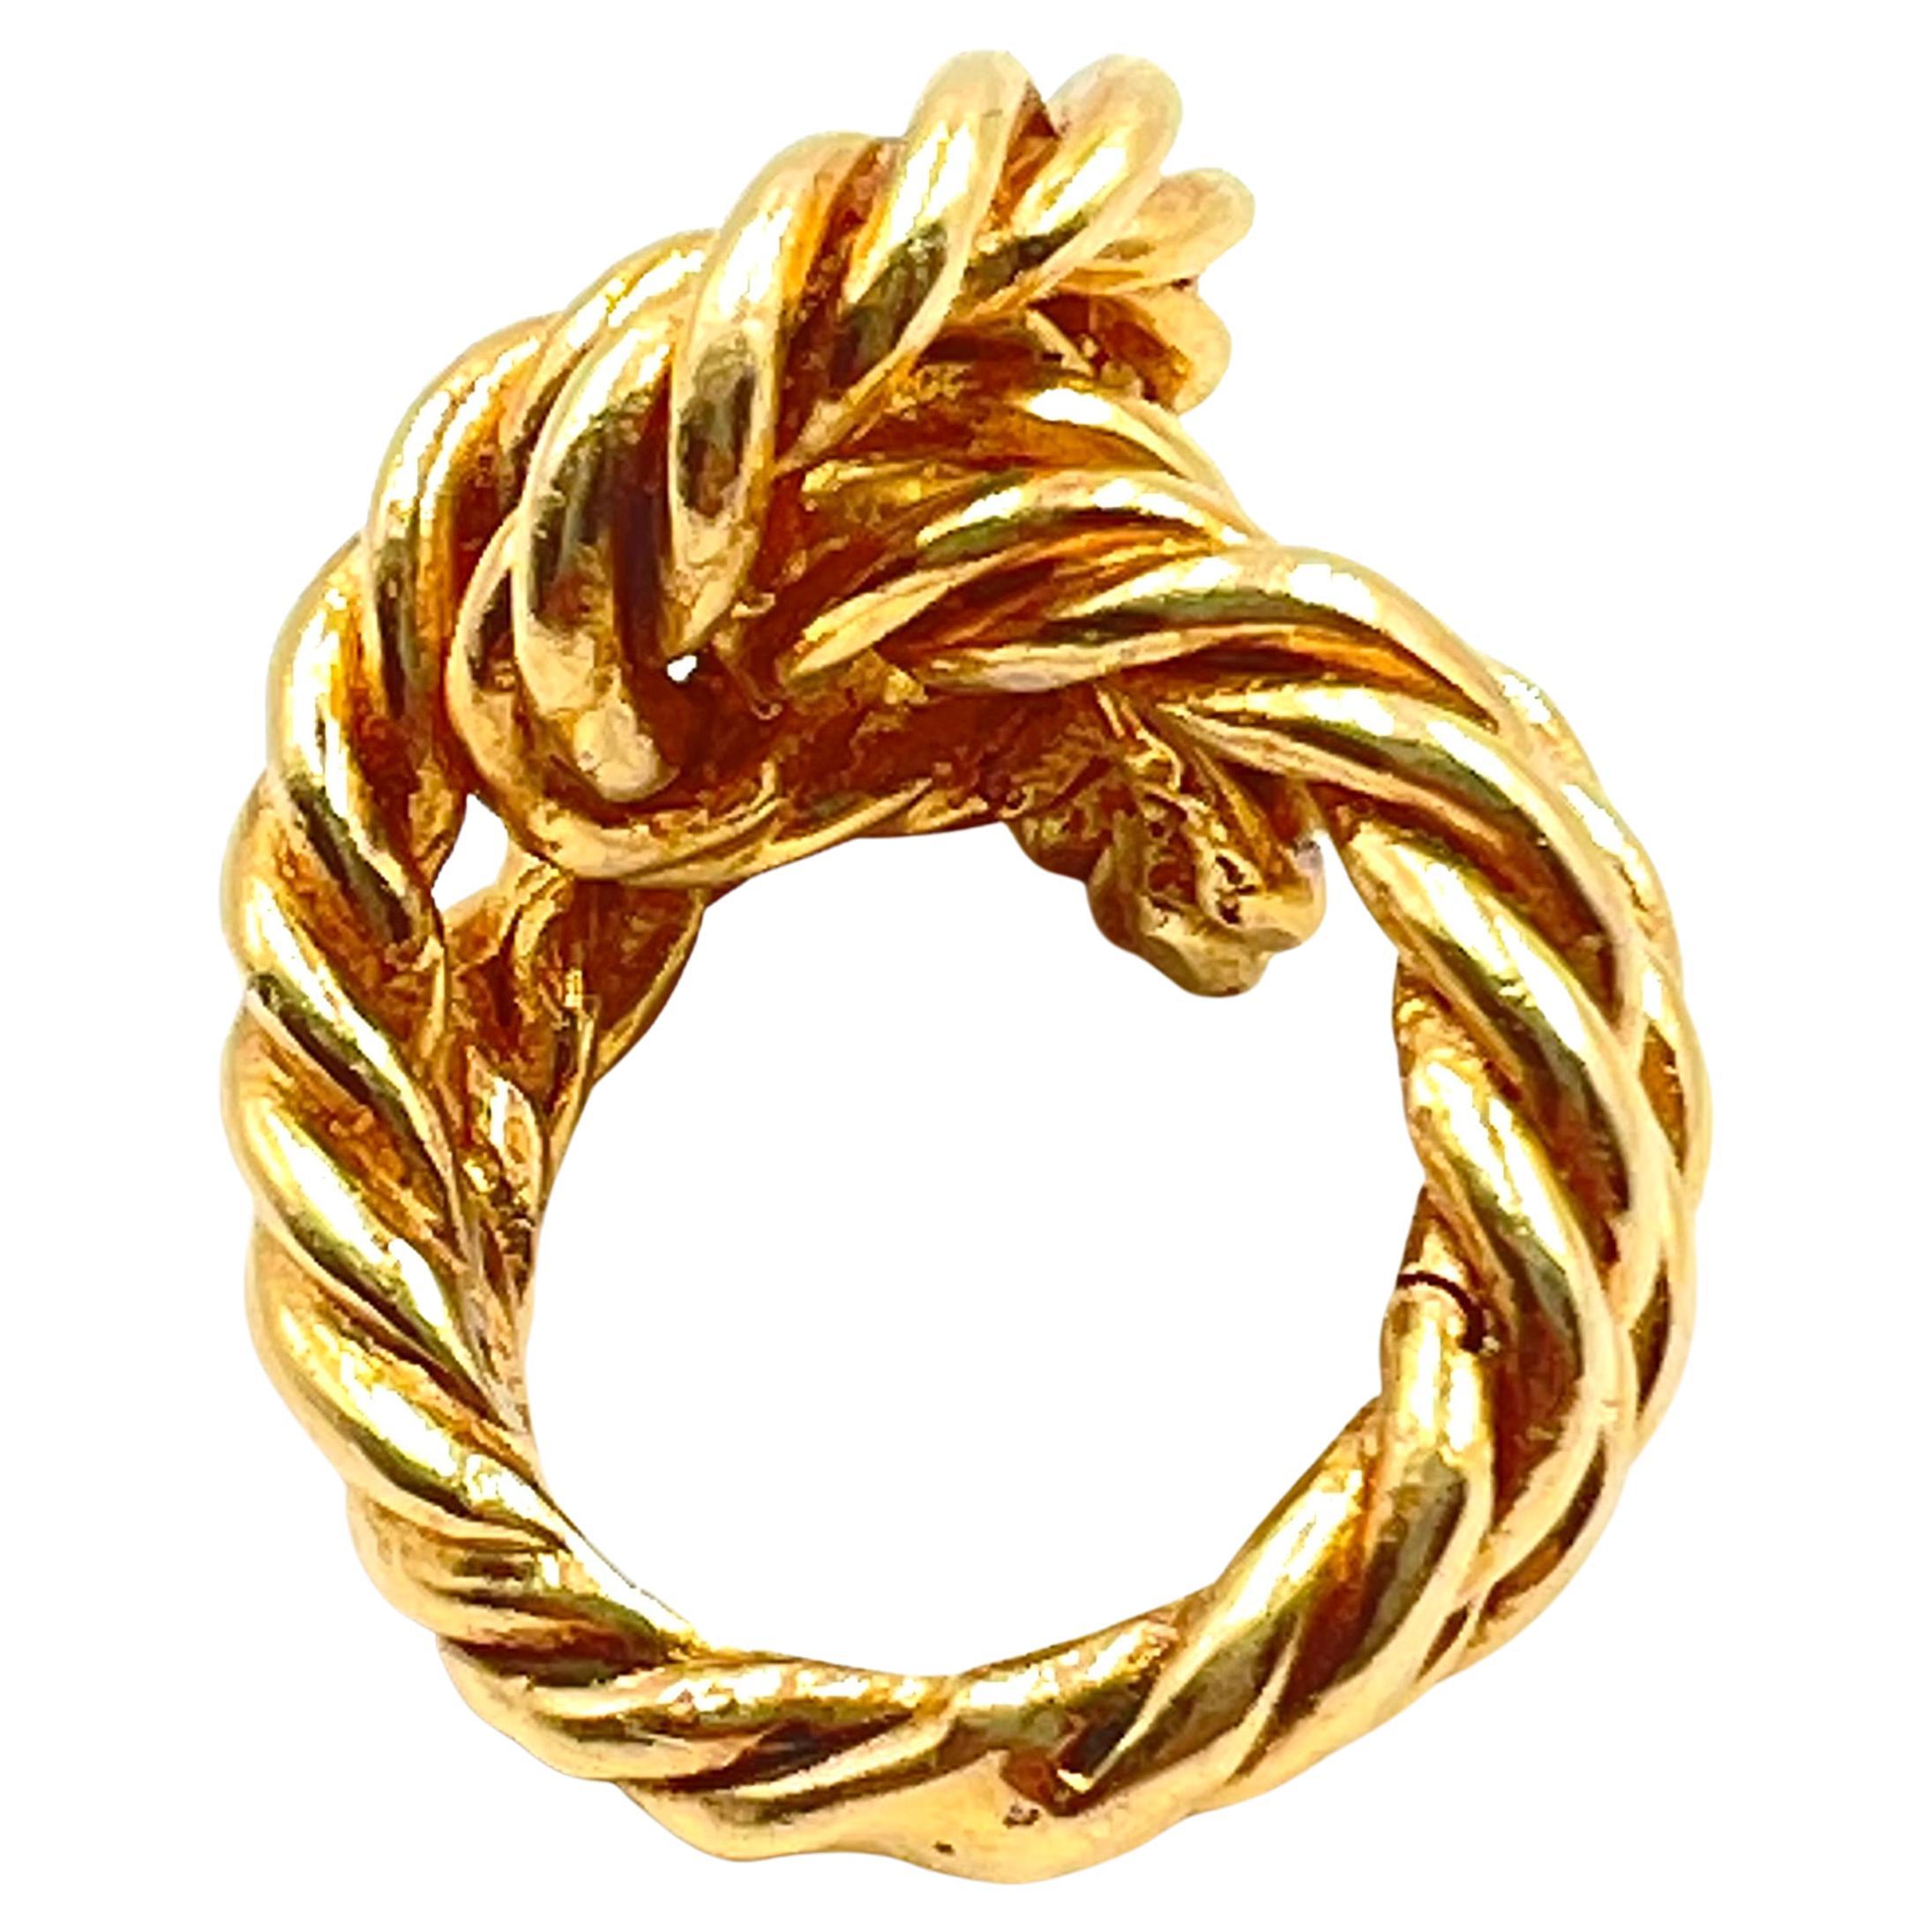 Nautical rope style knot design ring in 14kt yellow gold, measuring approximately 22.8mm and tapering to 3.9mm at the bottom of shank.  The rope design runs through the entire circumference of the ring.  Stamped 